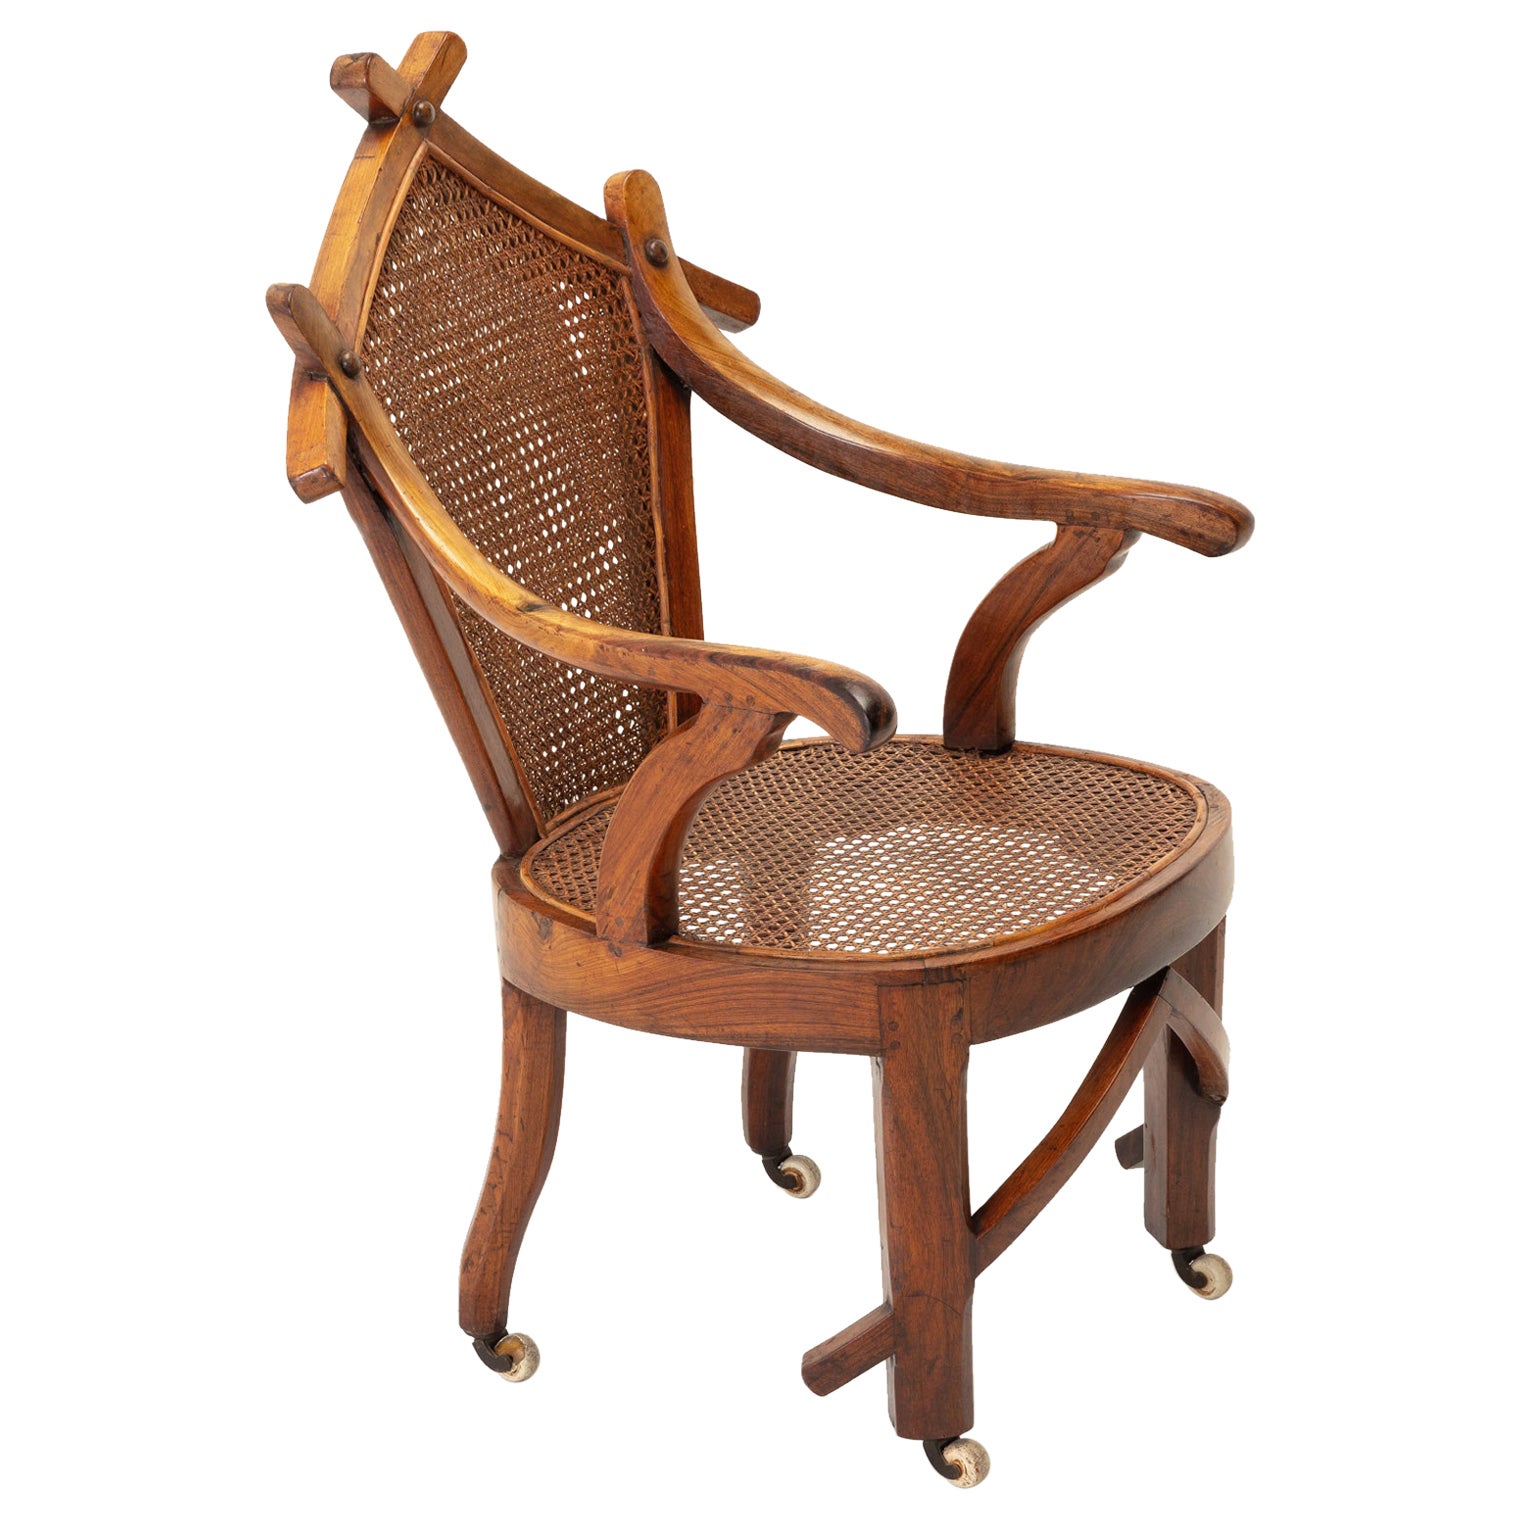 A very unusual and stylish 19th century walnut and cane chair, featuring an uncommon top rail of crossed pieces of walnut with arms attached by round head rivets. Both seat and back are fitted with handwoven cane.

In excellent condition with a